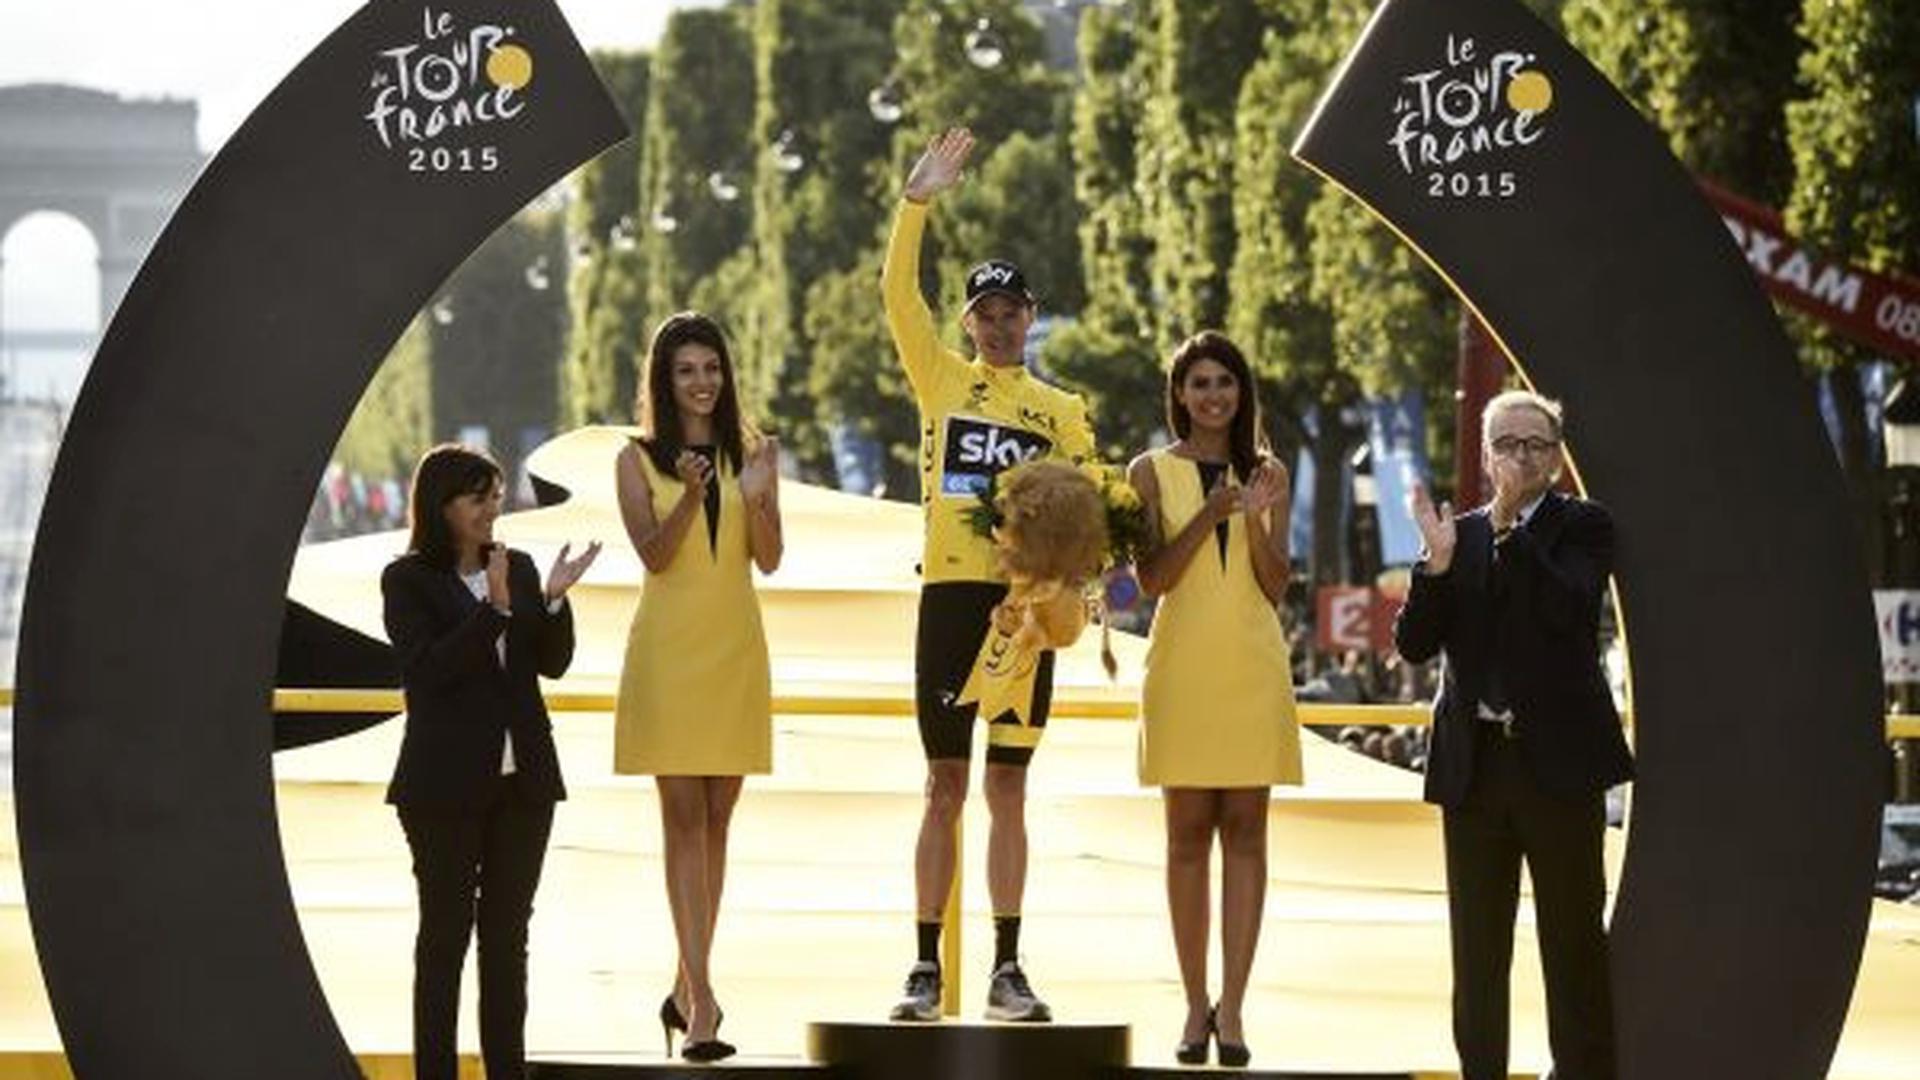 Tour de France 2015's winner Great Britain's Christopher Froome celebrates his victory on the podium on the Champs-Elysees avenue, flanked by Paris mayor Anne Hidalgo (L) at the end of the 109,5 km twenty-first and last stage of the 102nd edition of the Tour de France cycling race on July 26, 2015, between Sevres and Paris. AFP PHOTO / ERIC FEFERBERG